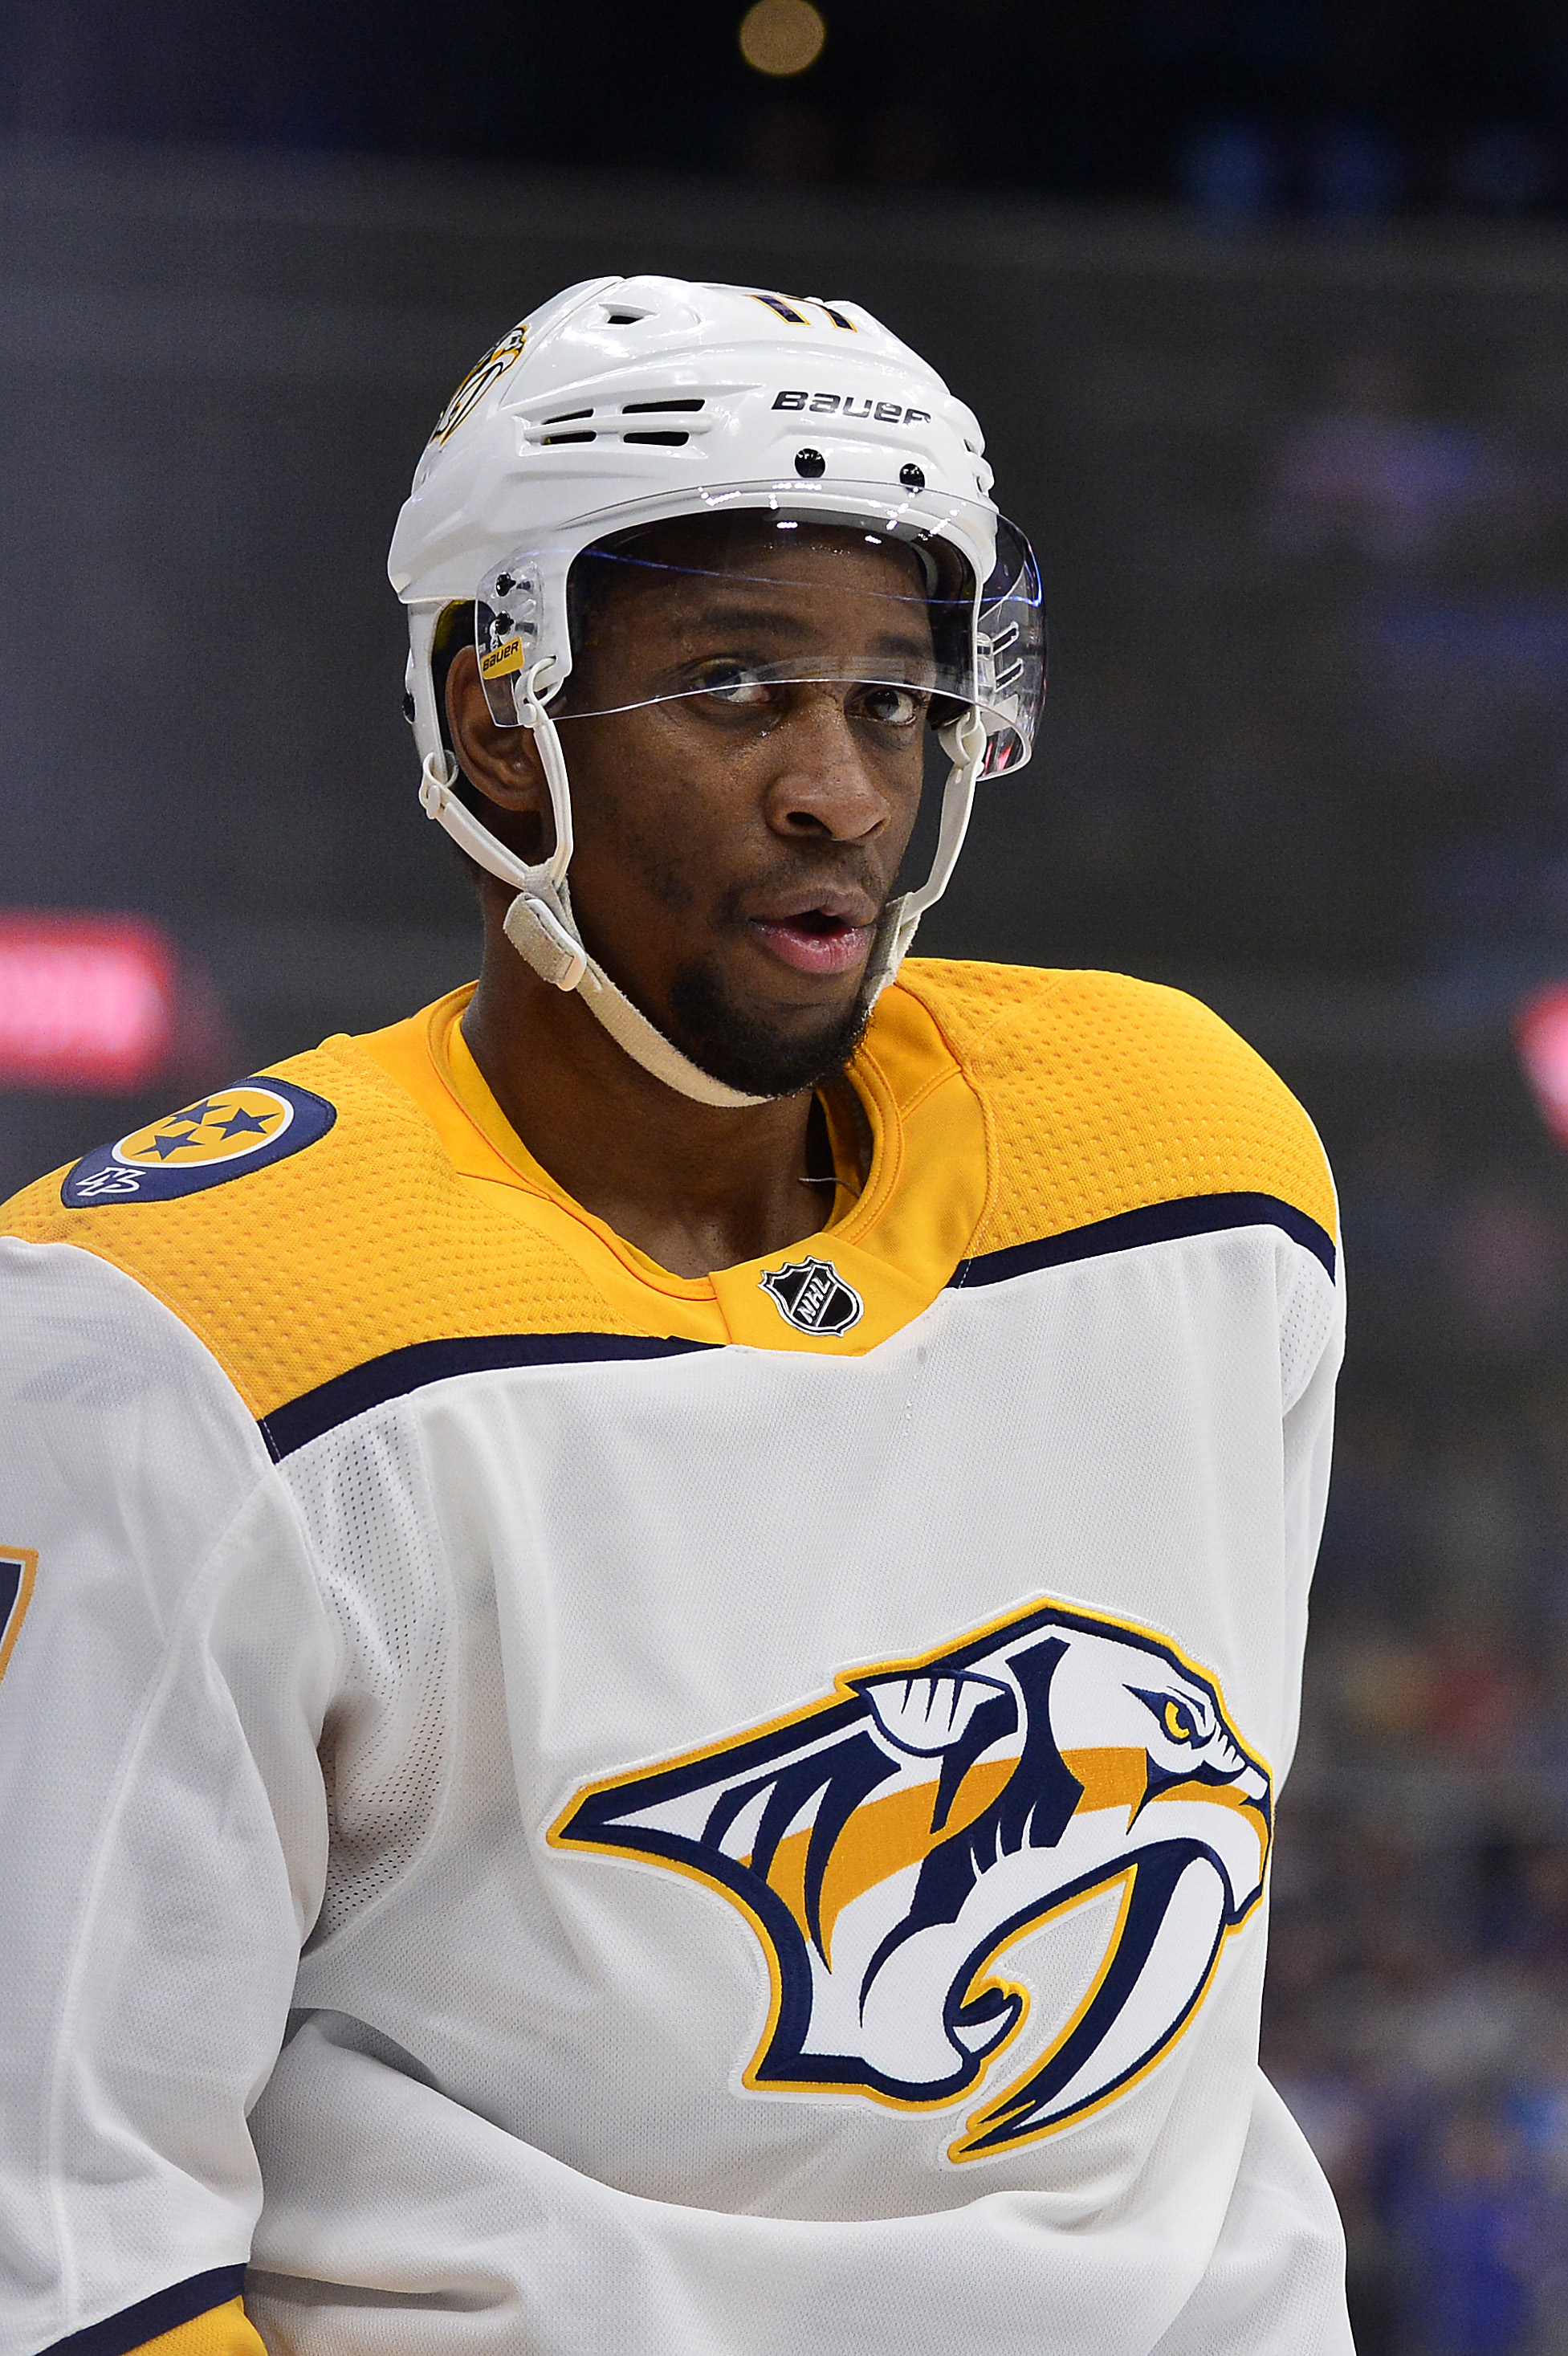 Predators: Wayne Simmonds looks to leave mark in Stanley Cup playoffs